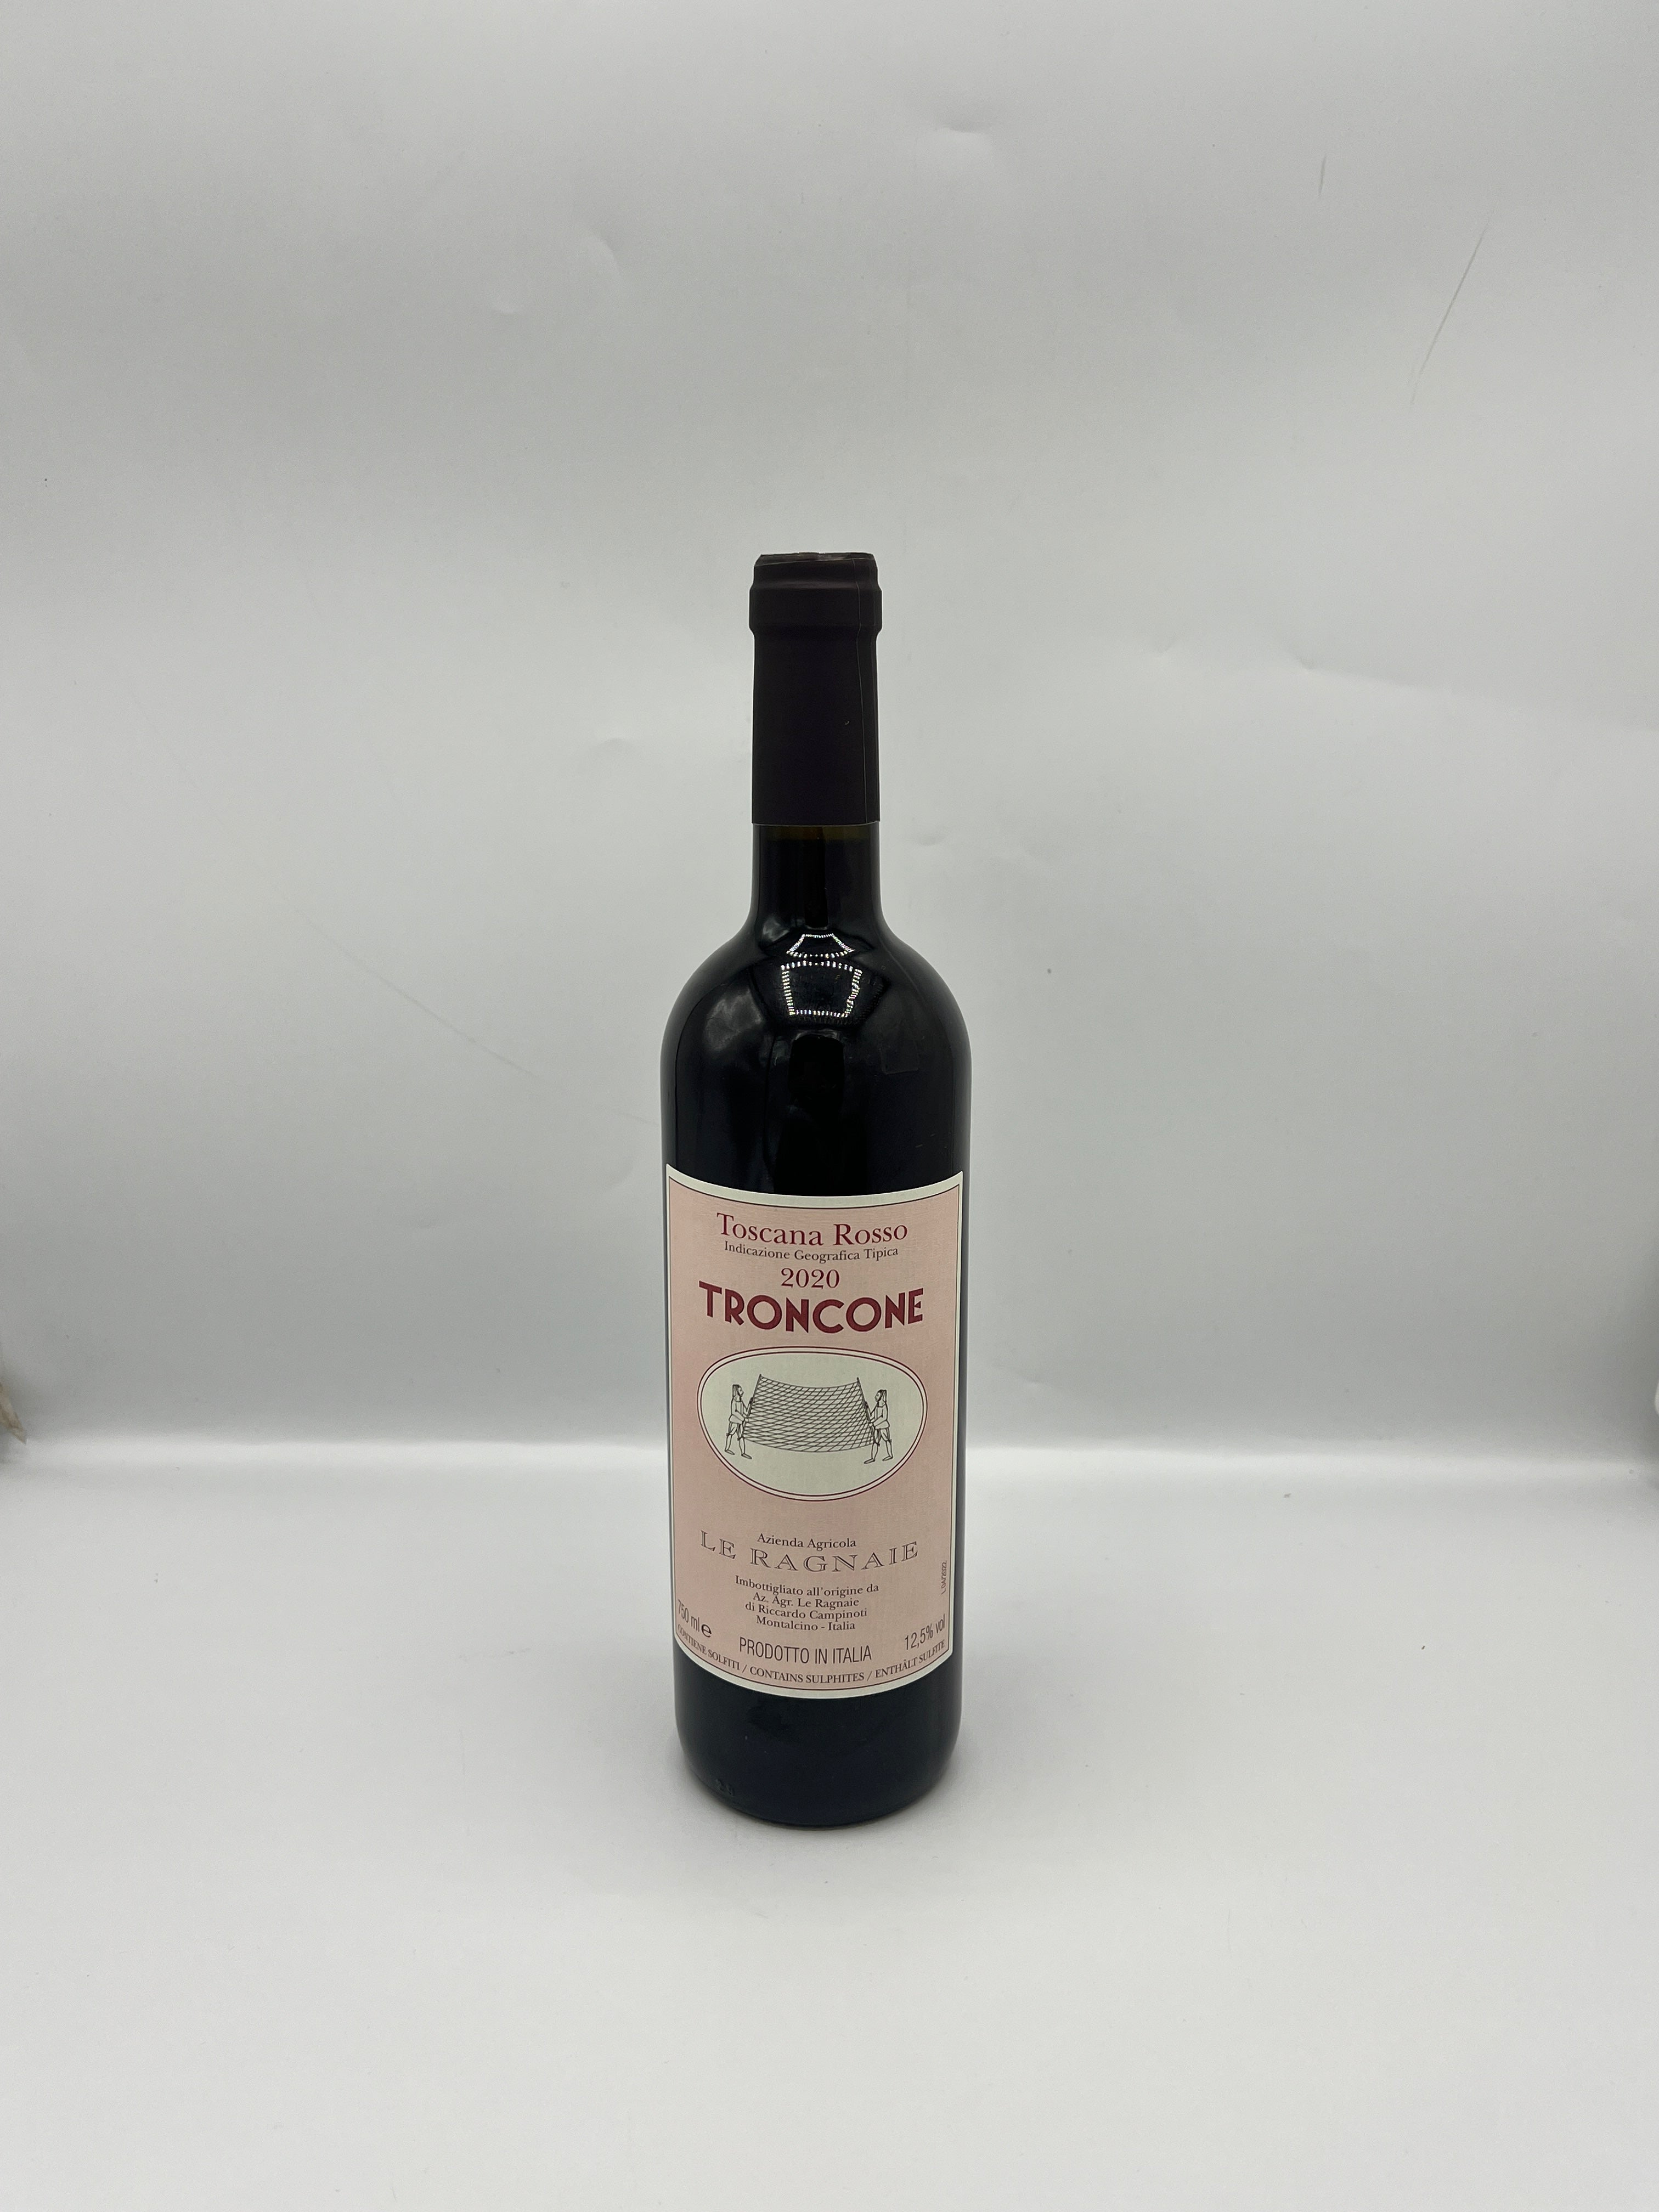 Italie IGT Tosacana Rosso "Troncone" 2020 Rouge - Le Ragnaie